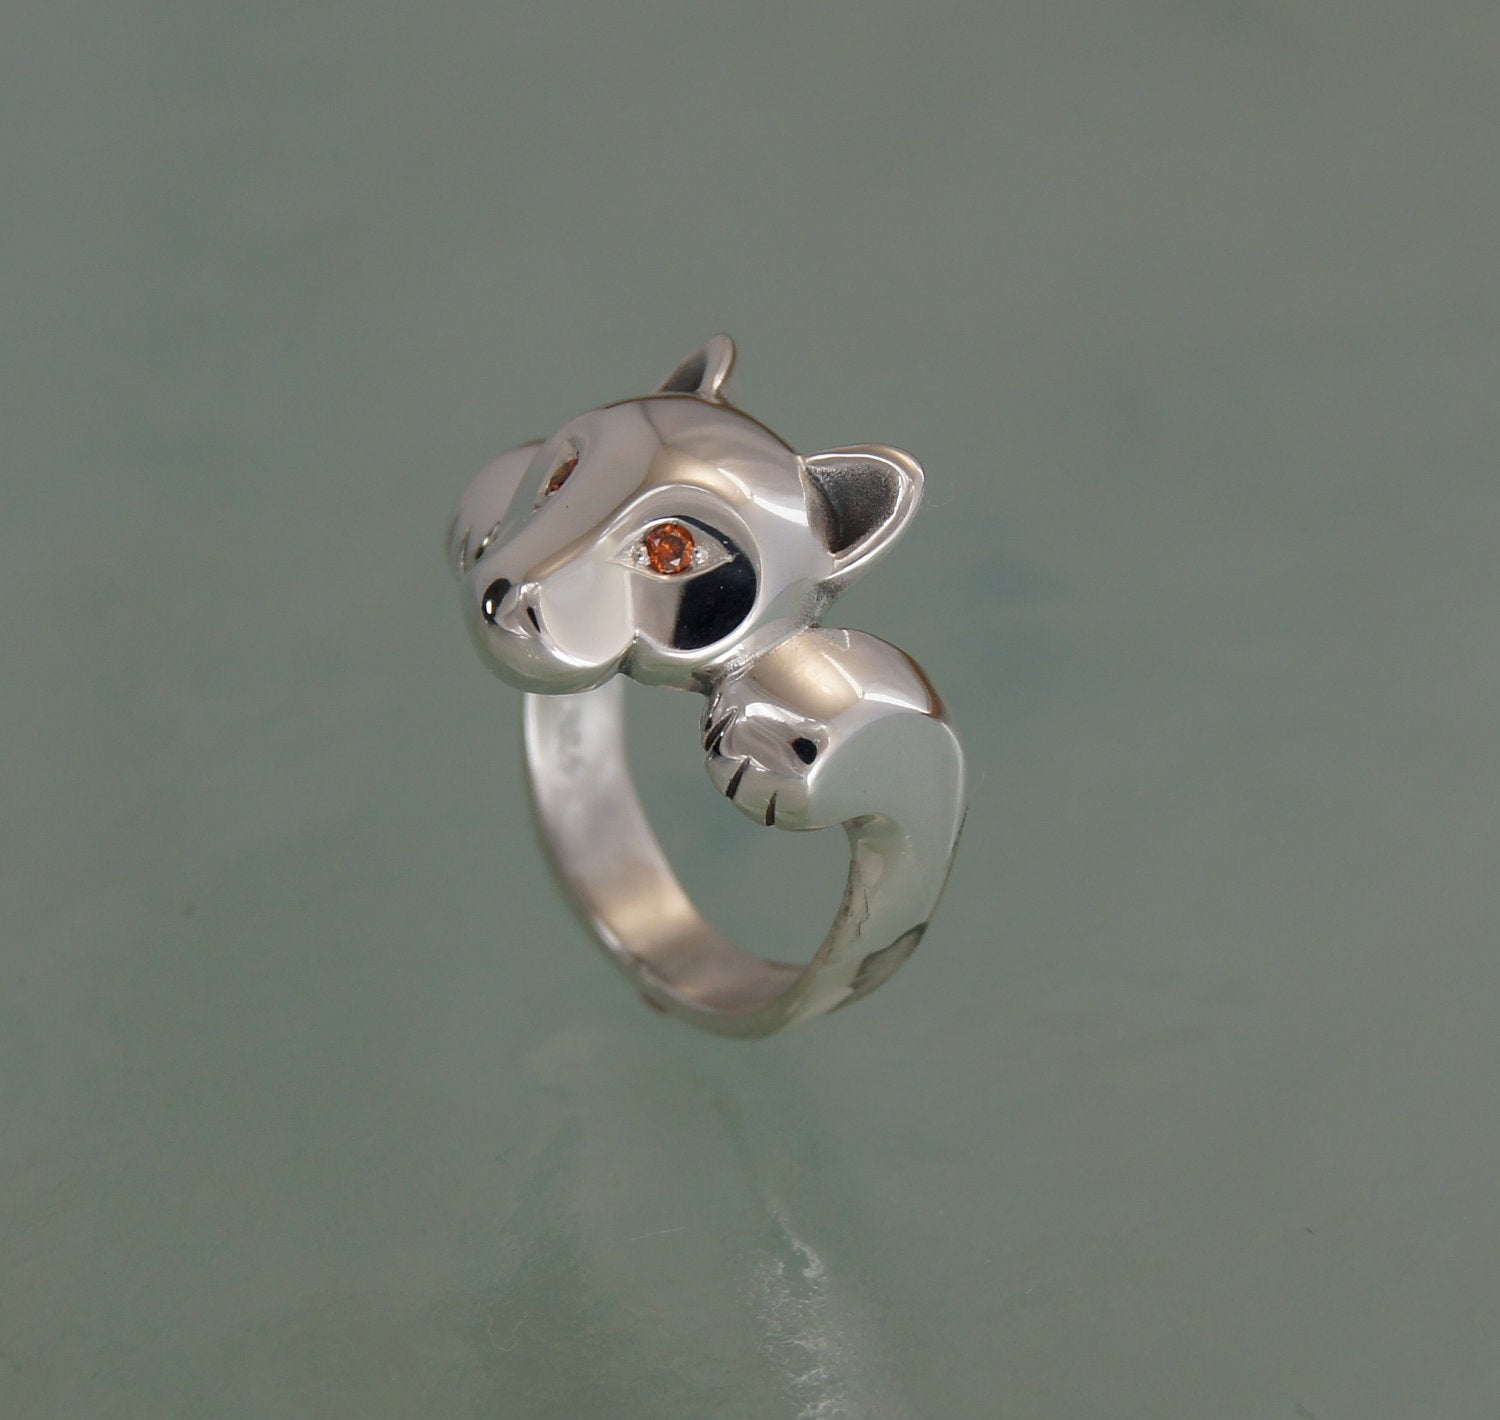 leaping puma silver ring with diamond eyes